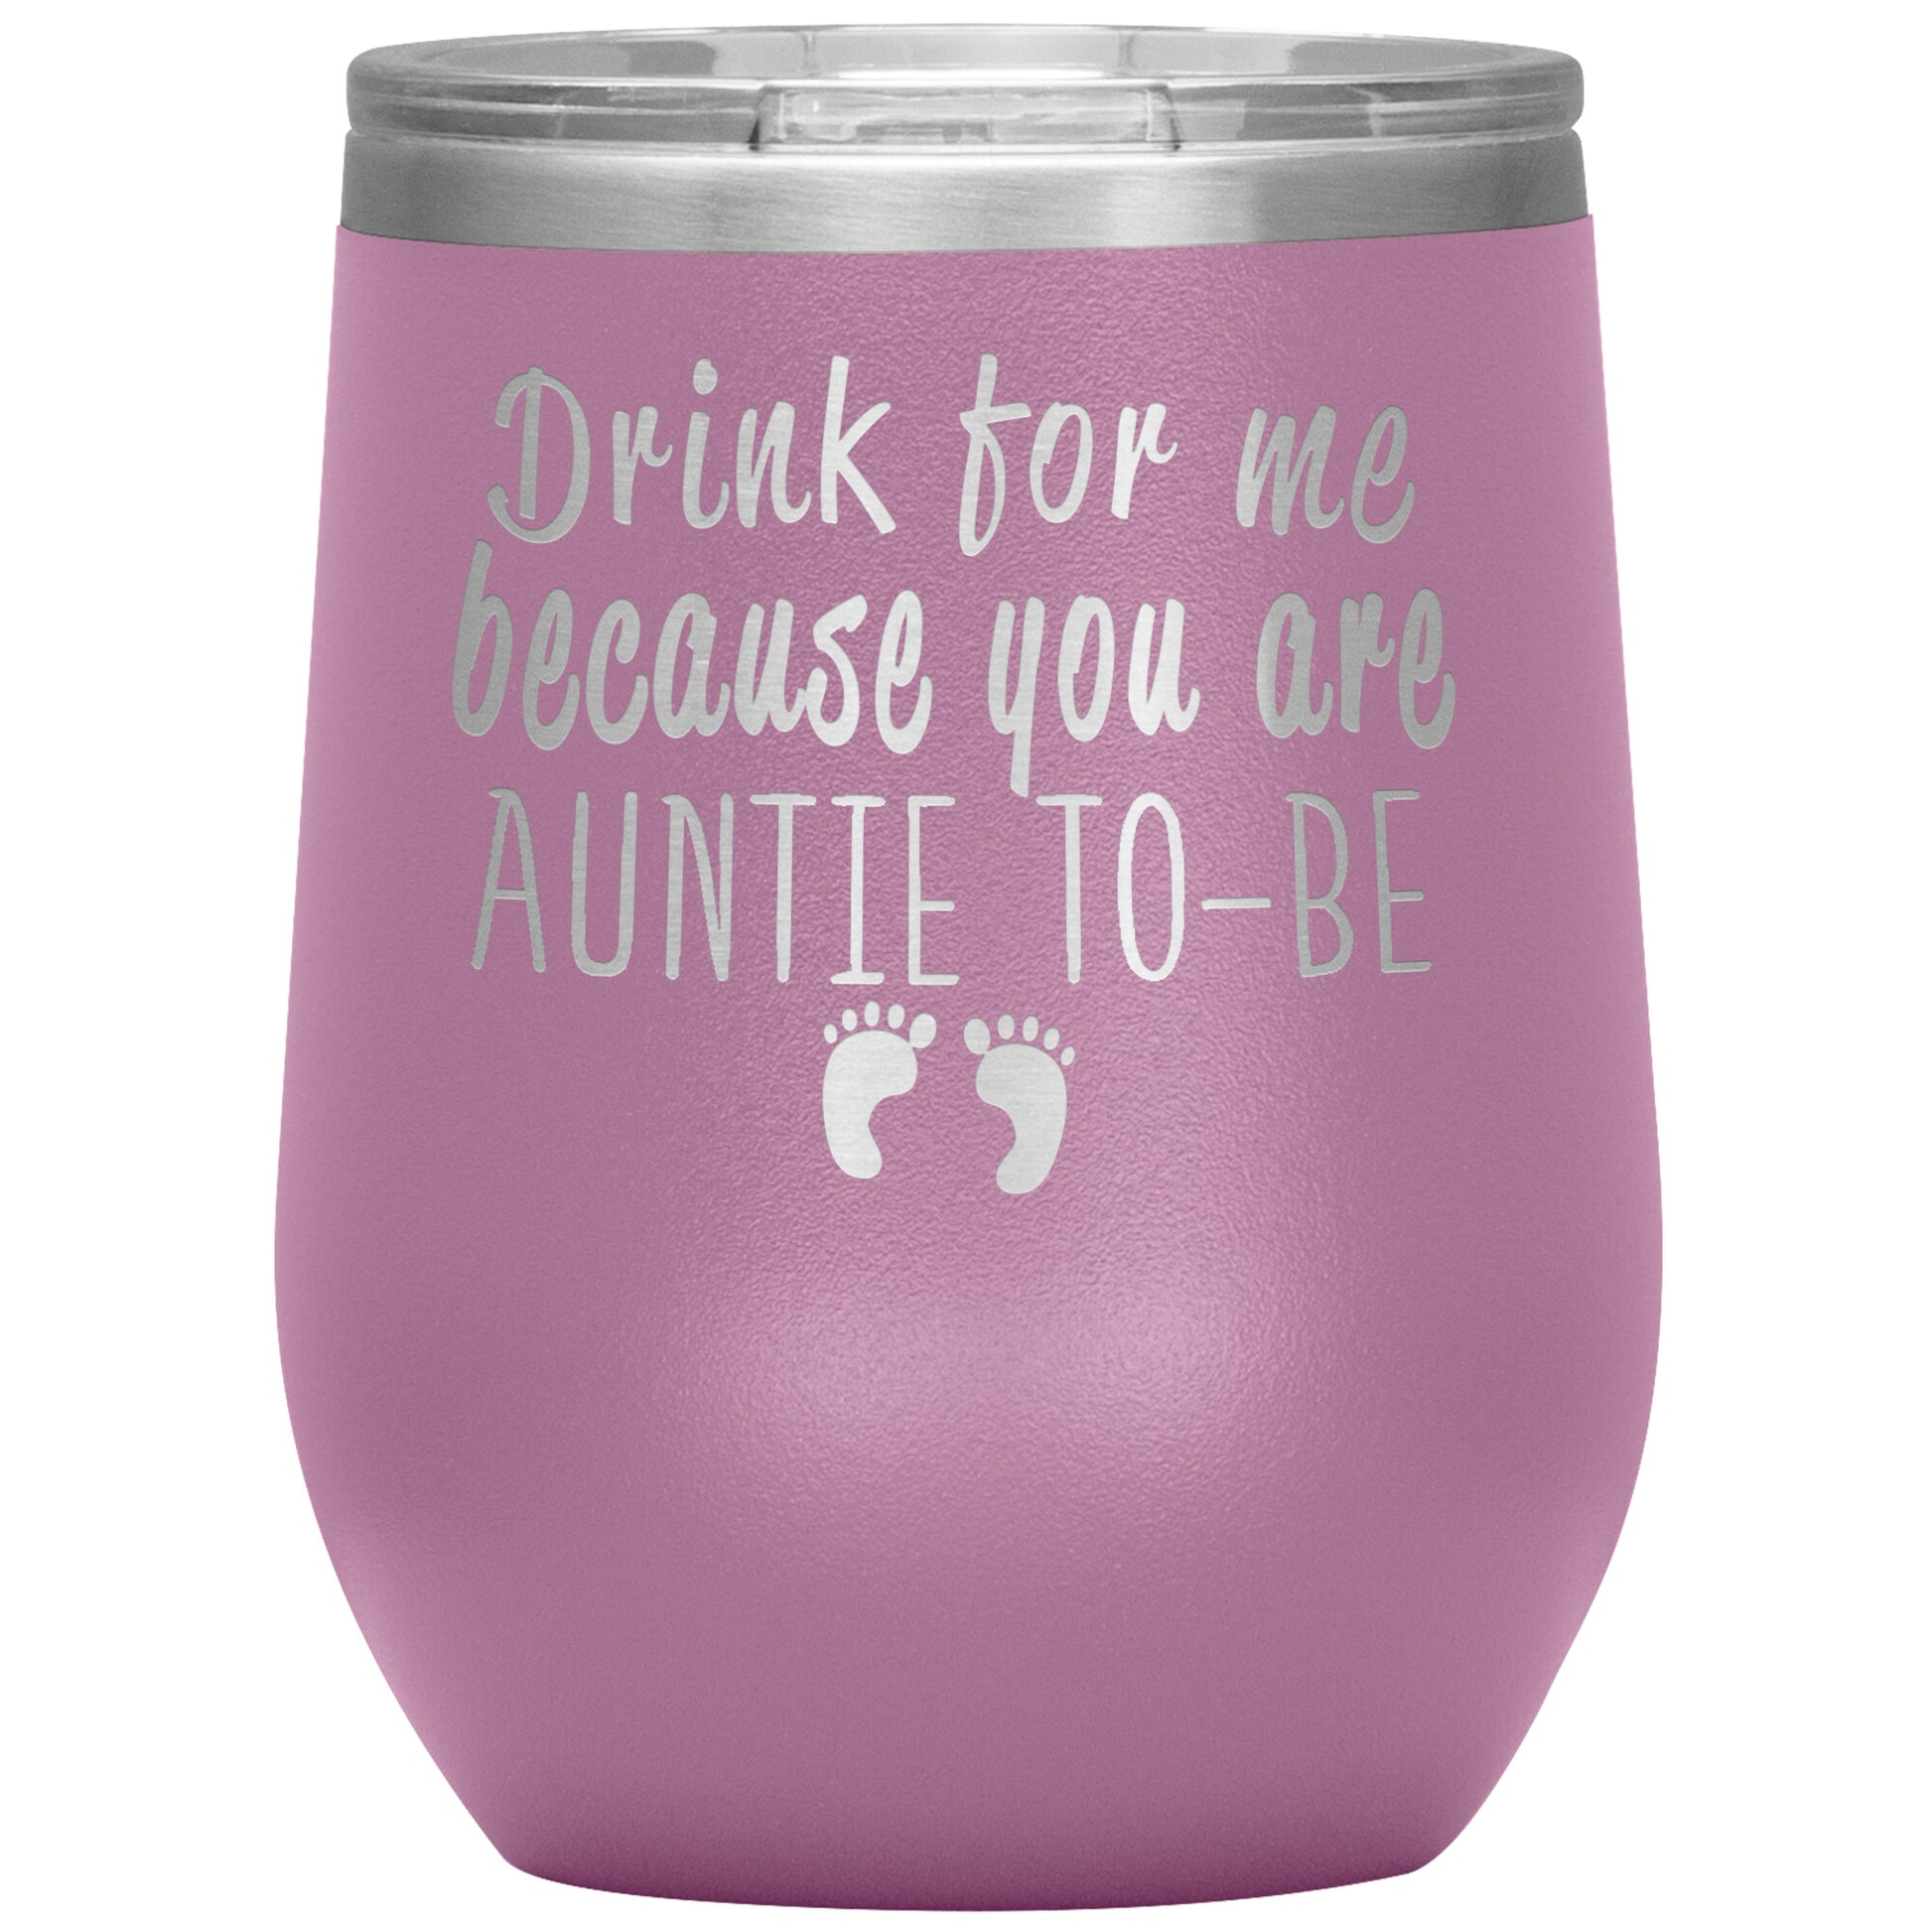 Drink for Me Auntie To Be